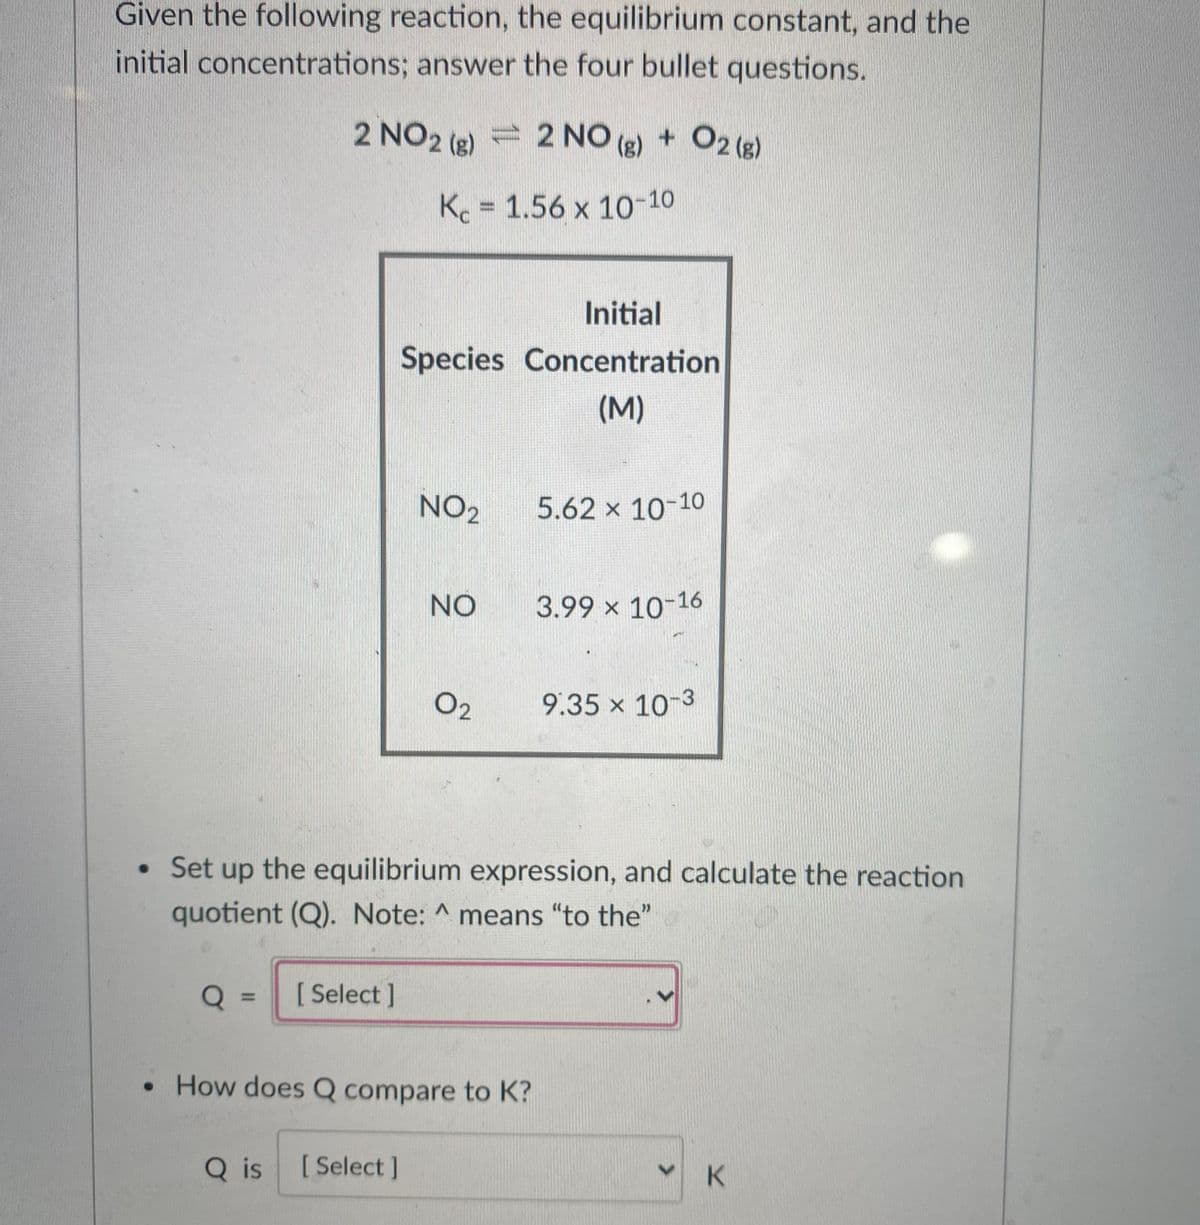 Given the following reaction, the equilibrium constant, and the
initial concentrations; answer the four bullet questions.
2 NO2 (g) = 2 NO (g) + O2 (g)
K 1.56 x 10-10
Initial
Species Concentration
(M)
NO2
5.62 x 10-10
NO
3.99 x 10-16
O2
9.35 x 10-3
• Set up the equilibrium expression, and calculate the reaction
quotient (Q). Note: ^ means "to the"
[ Select ]
%3D
• How does Q compare to K?
Q is
[ Select ]
K.
